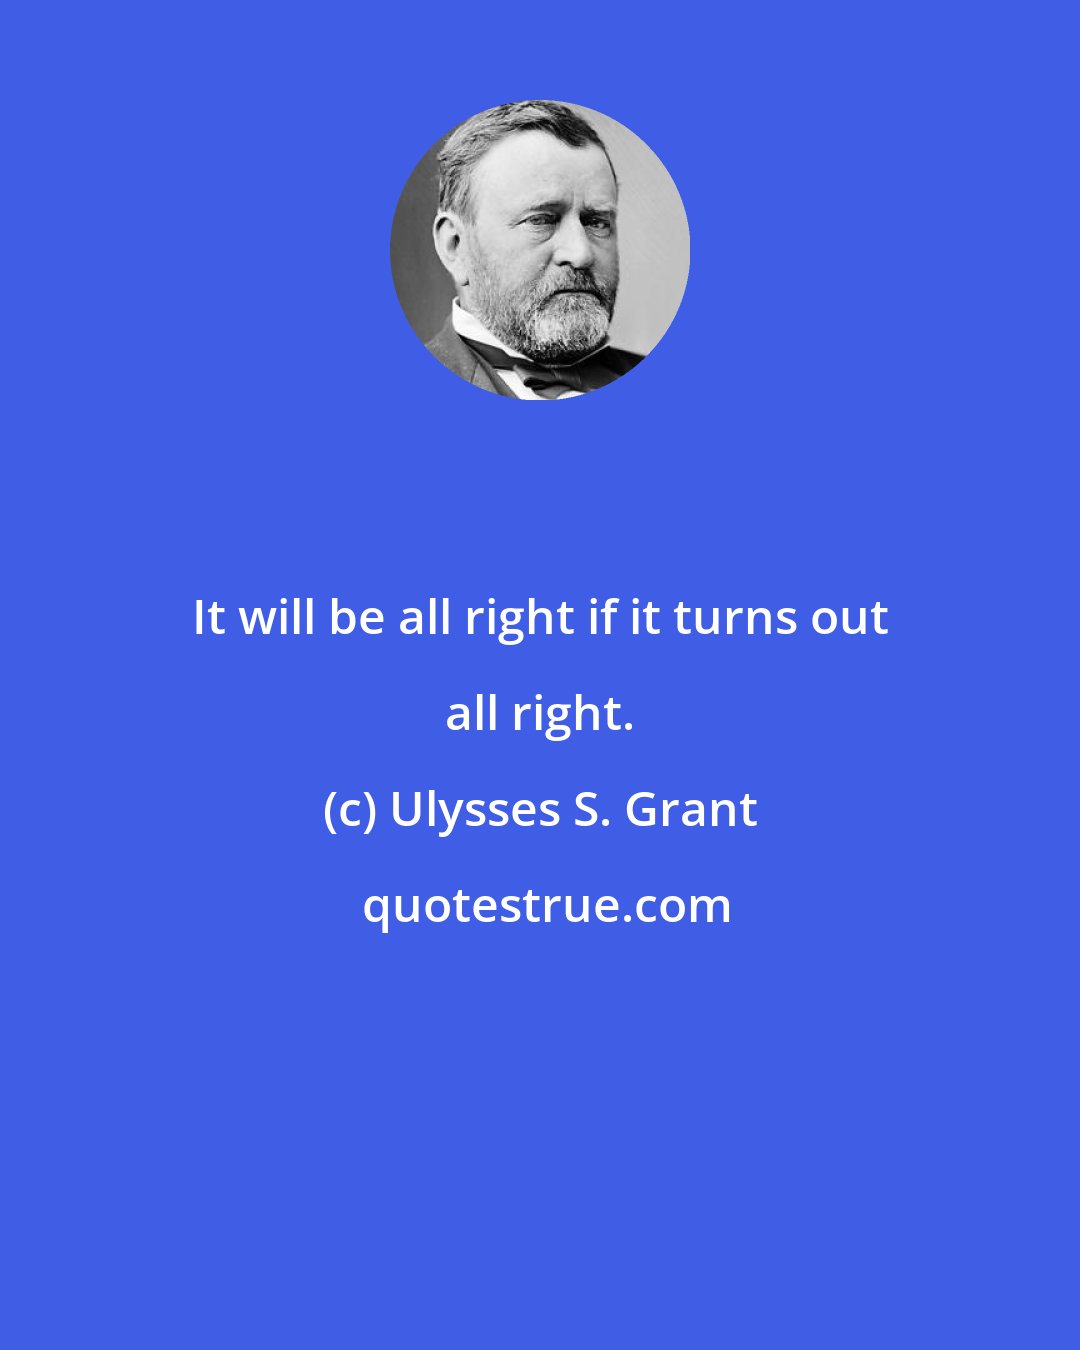 Ulysses S. Grant: It will be all right if it turns out all right.